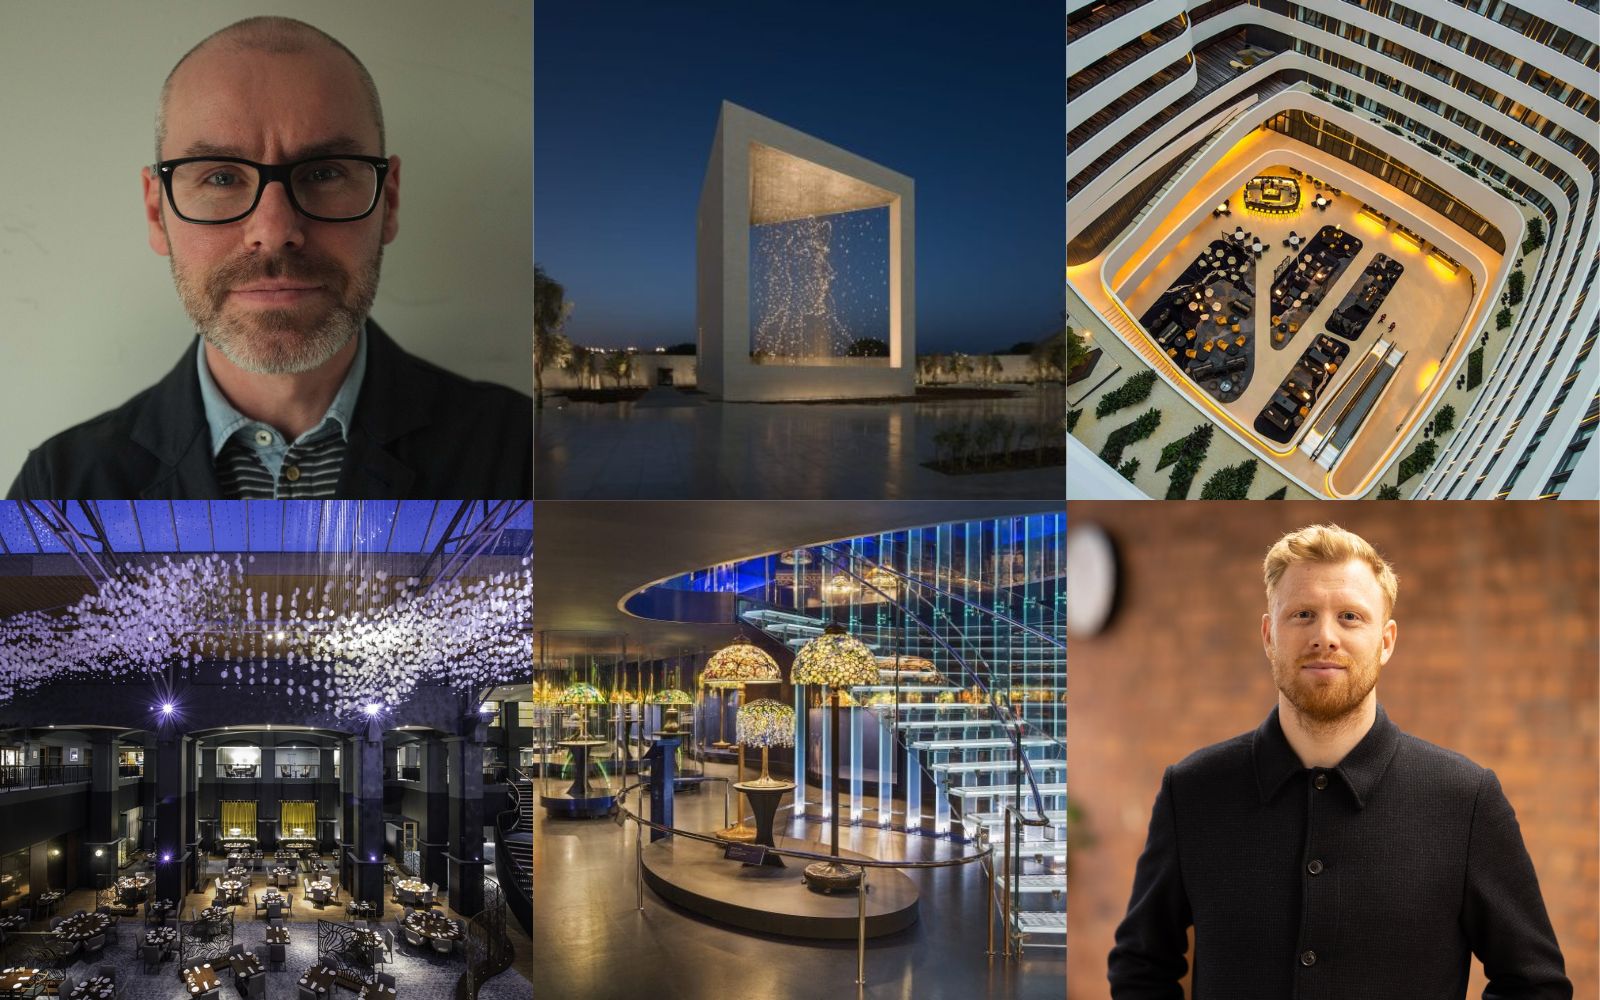 Collage of lighting projects explored in DESIGN POD Episode 28 circadian lighting